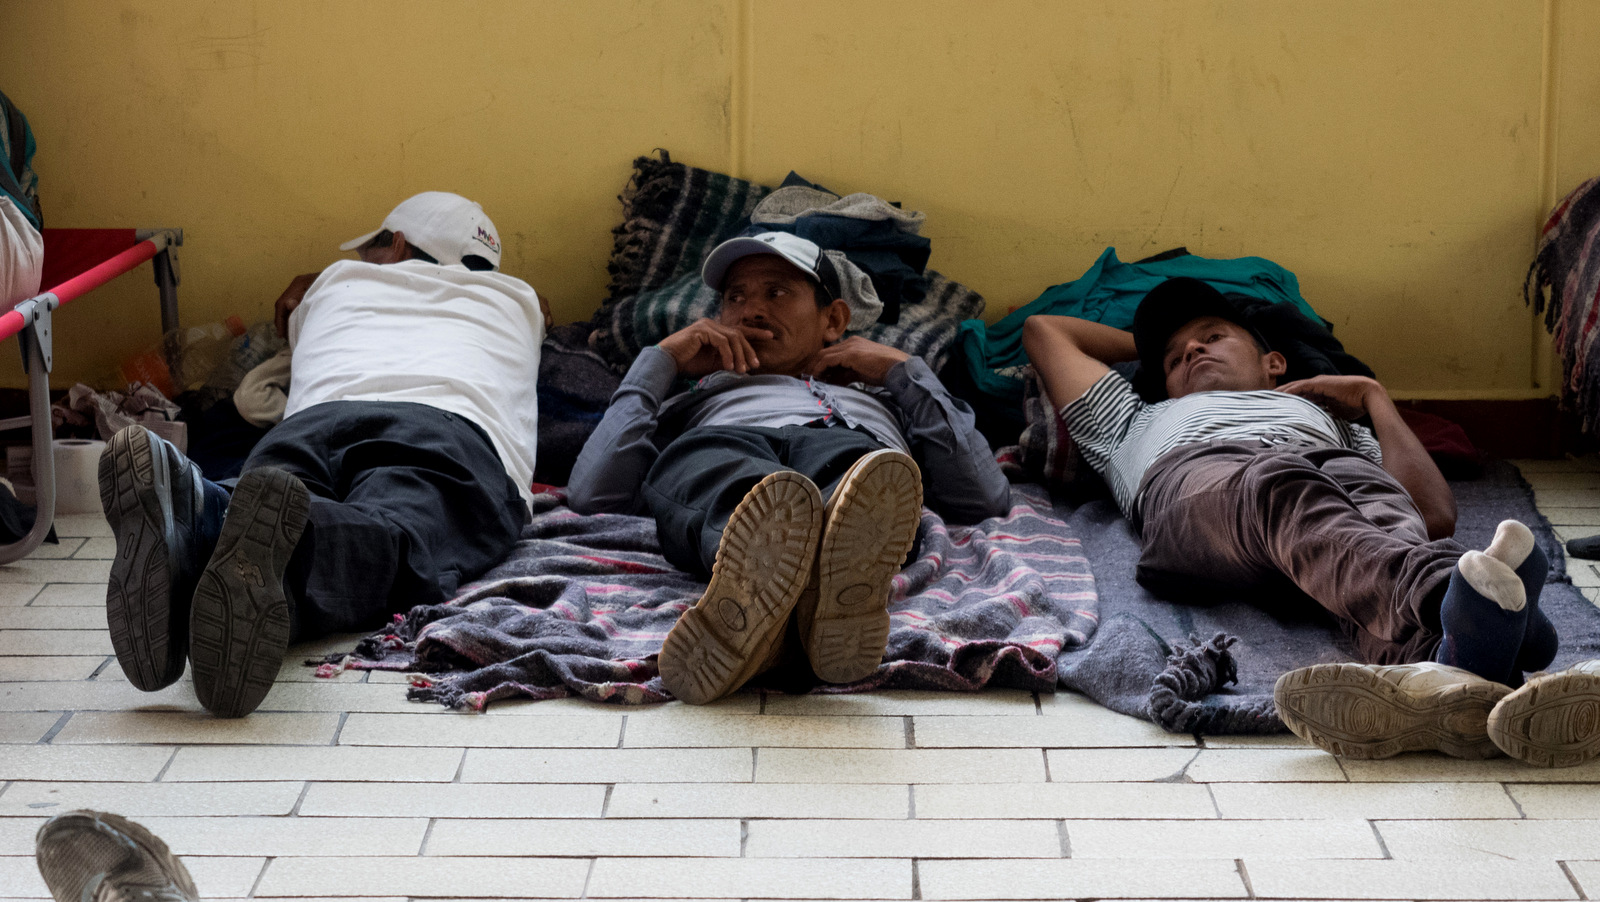 Three men rest after arriving to the Casa del Peregrino in Mexico City, April 10, 2018.